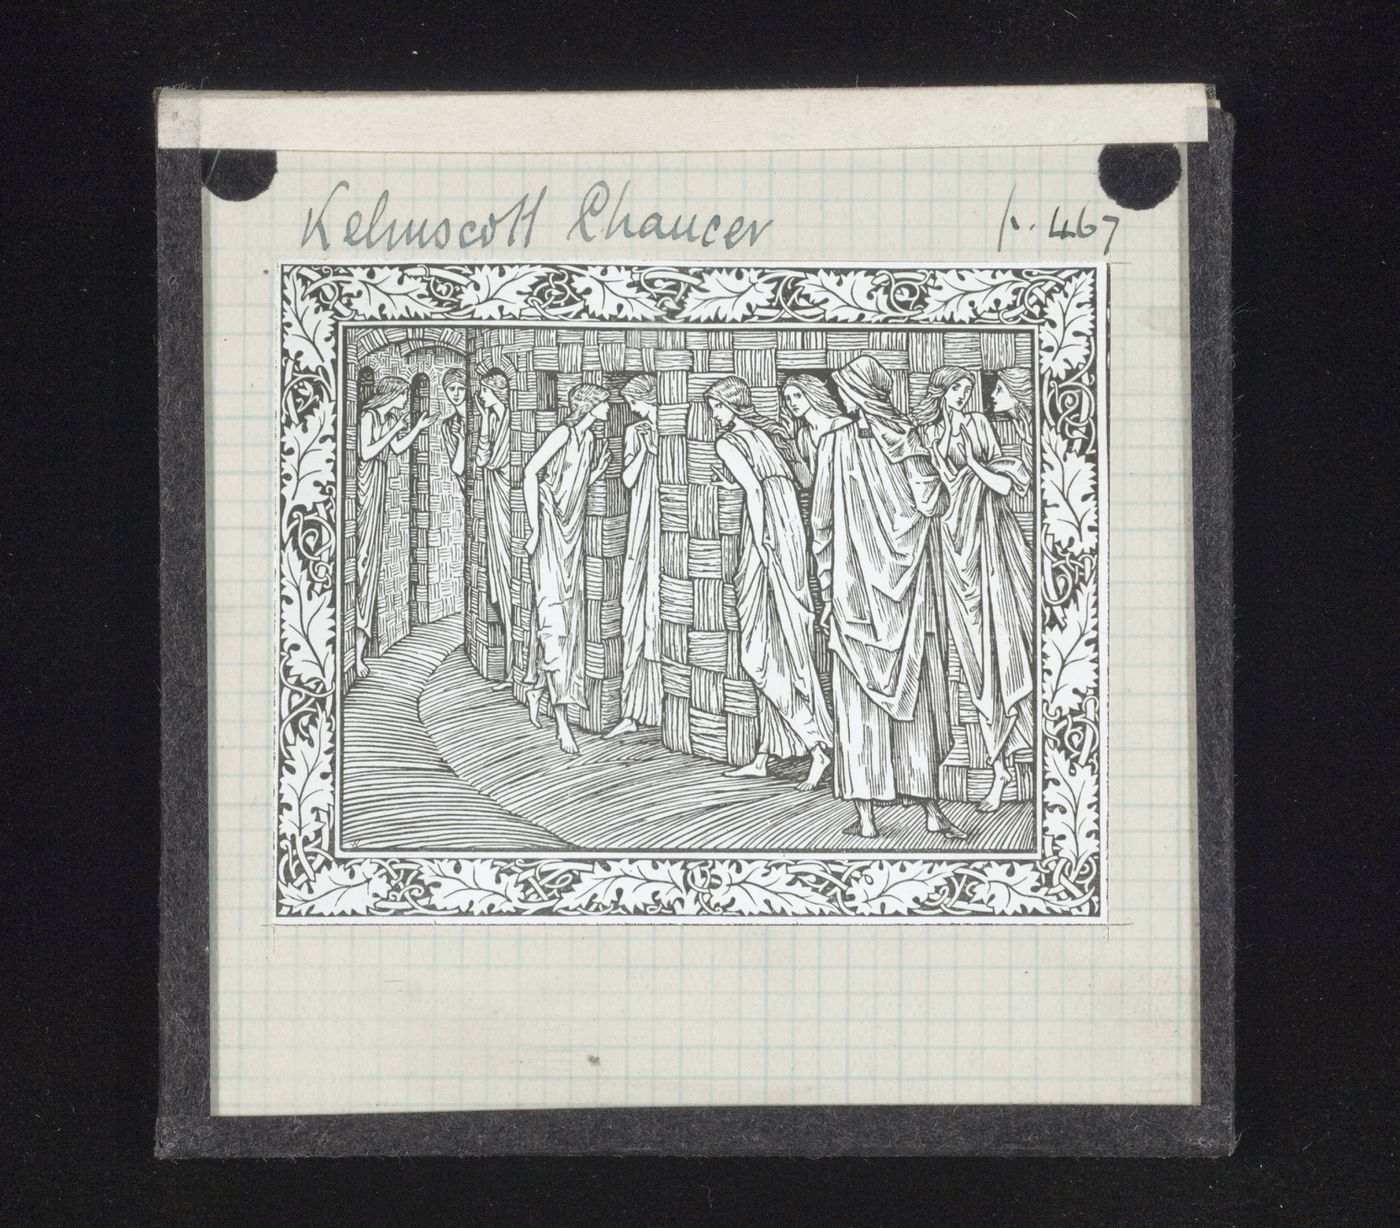 View of illustration in 'The Works of Geoffrey Chaucer'